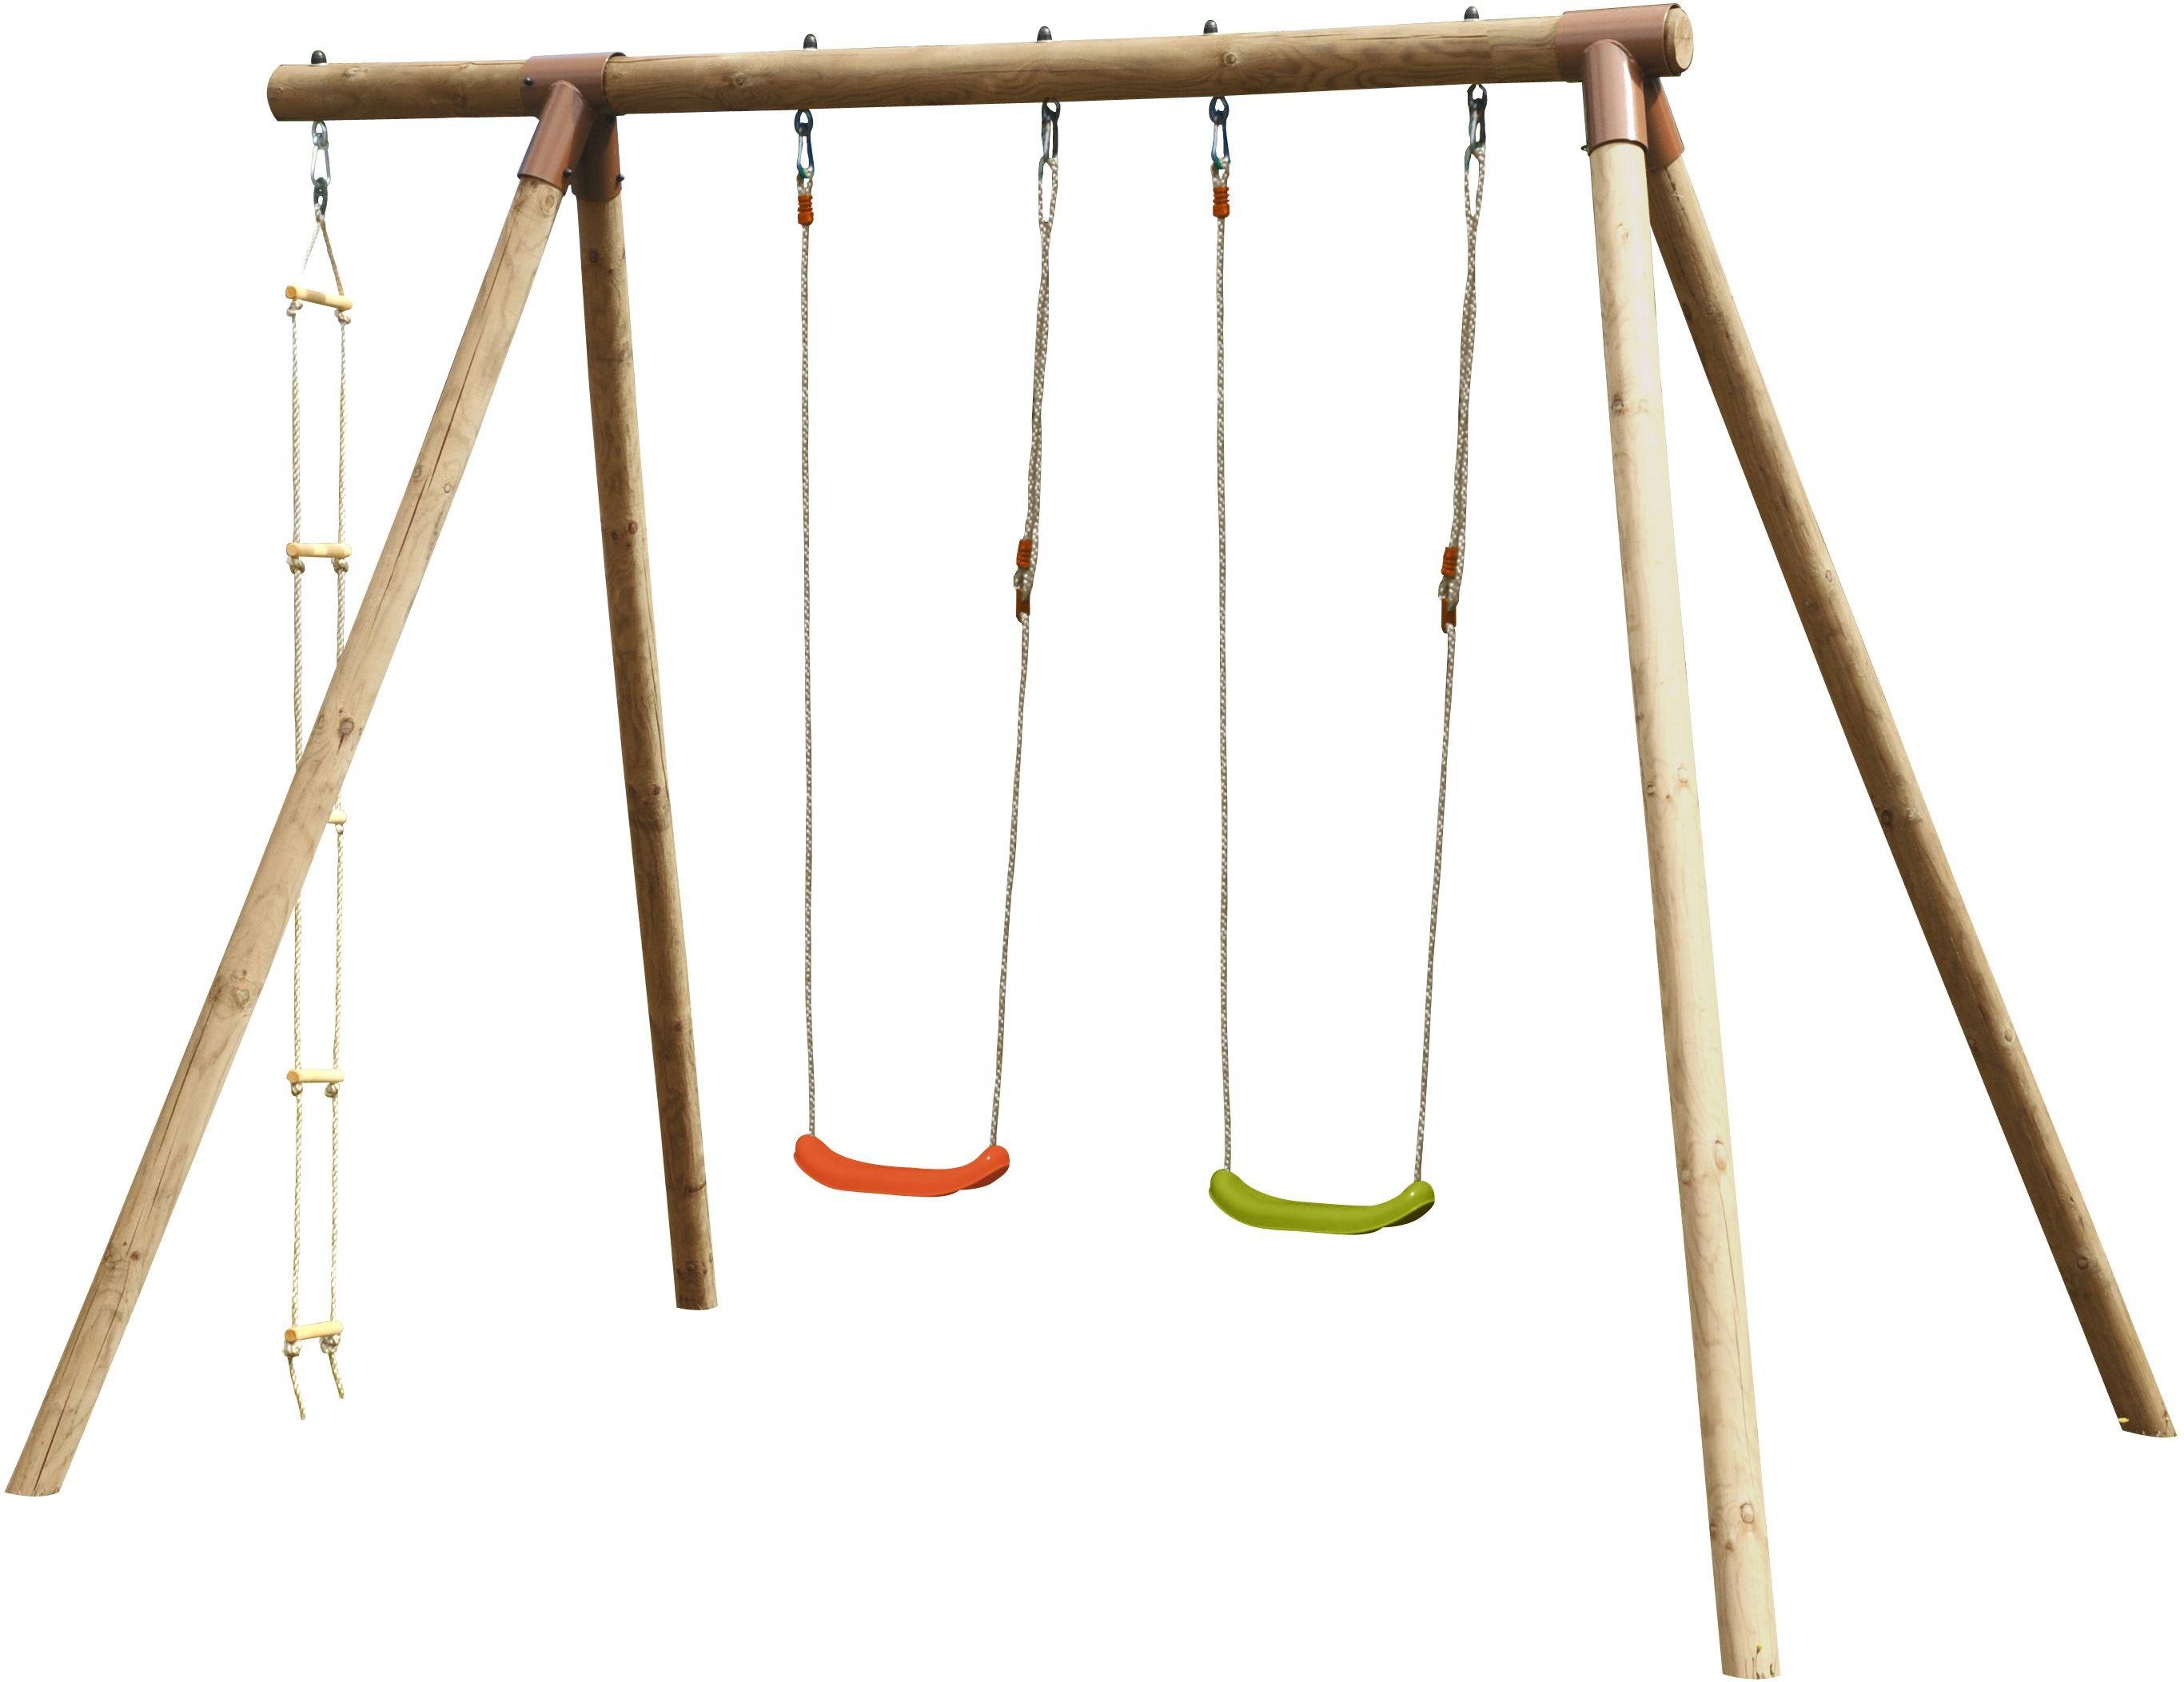 Soulet Merida Double Swing and Climbing Ladder. Review